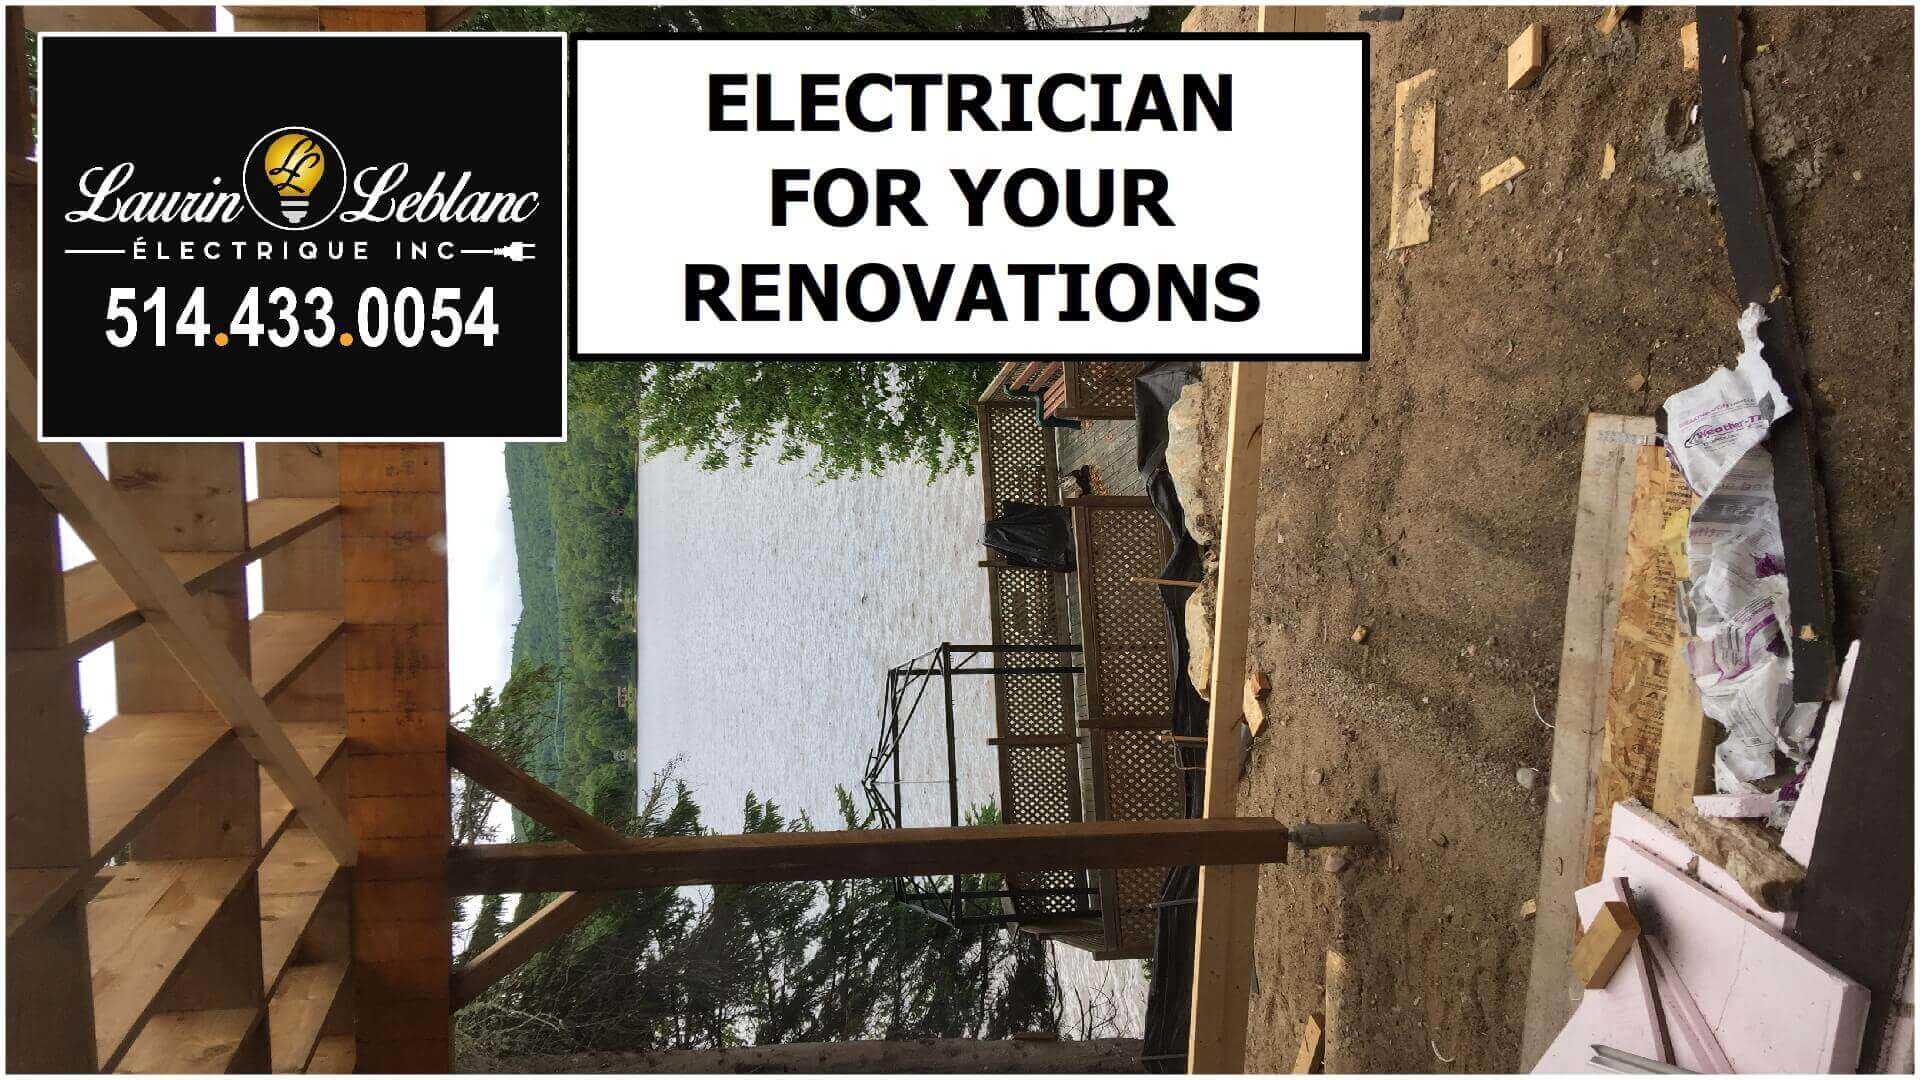 Electrician Renovations in Ile-Perrot